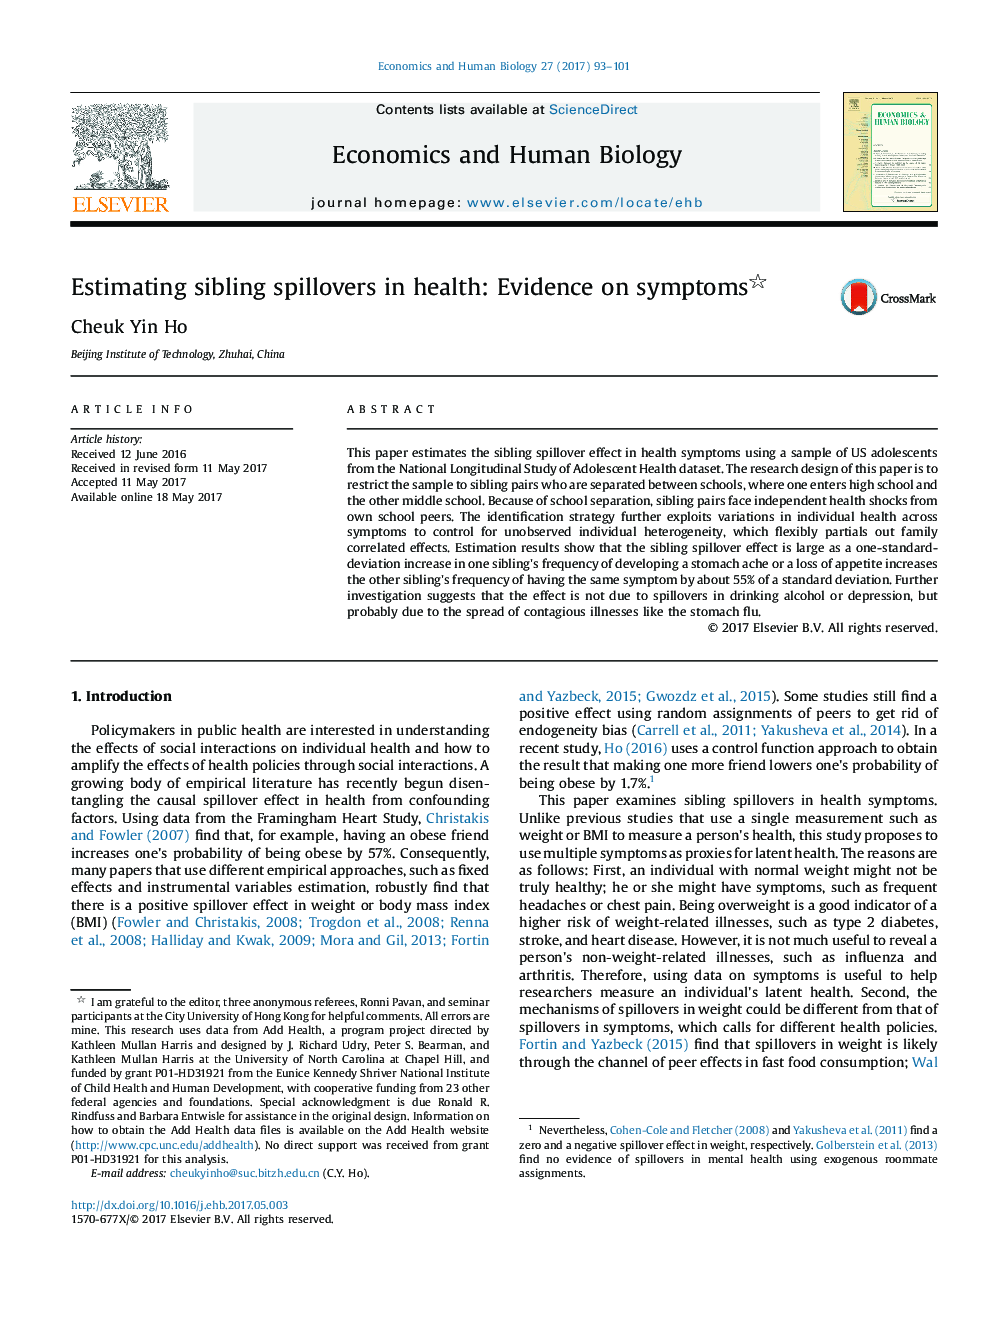 Estimating sibling spillovers in health: Evidence on symptoms